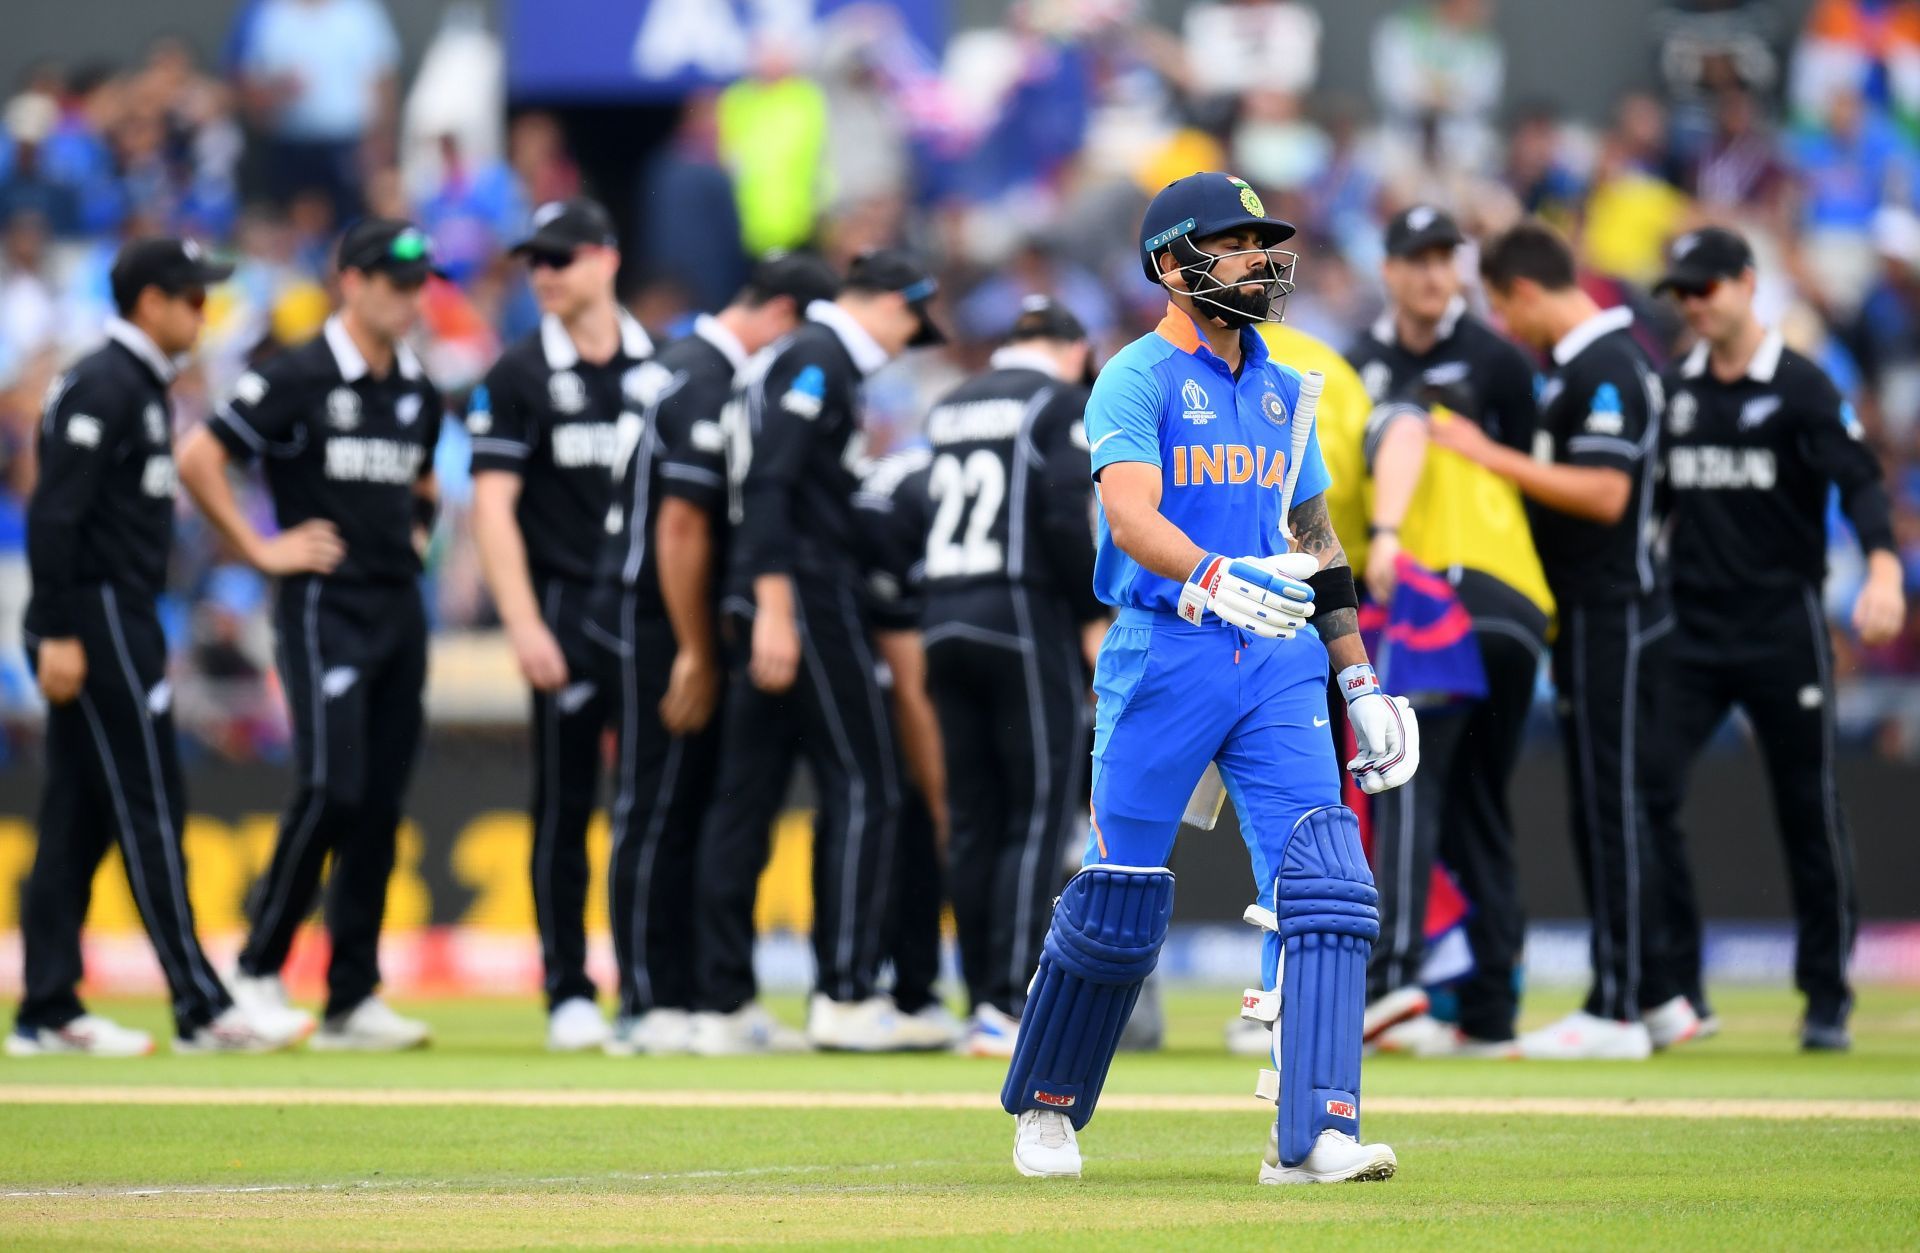 A dejected Virat Kohli walks back after being dismissed in the 2019 World Cup semi-final. (Pic: Getty Images)